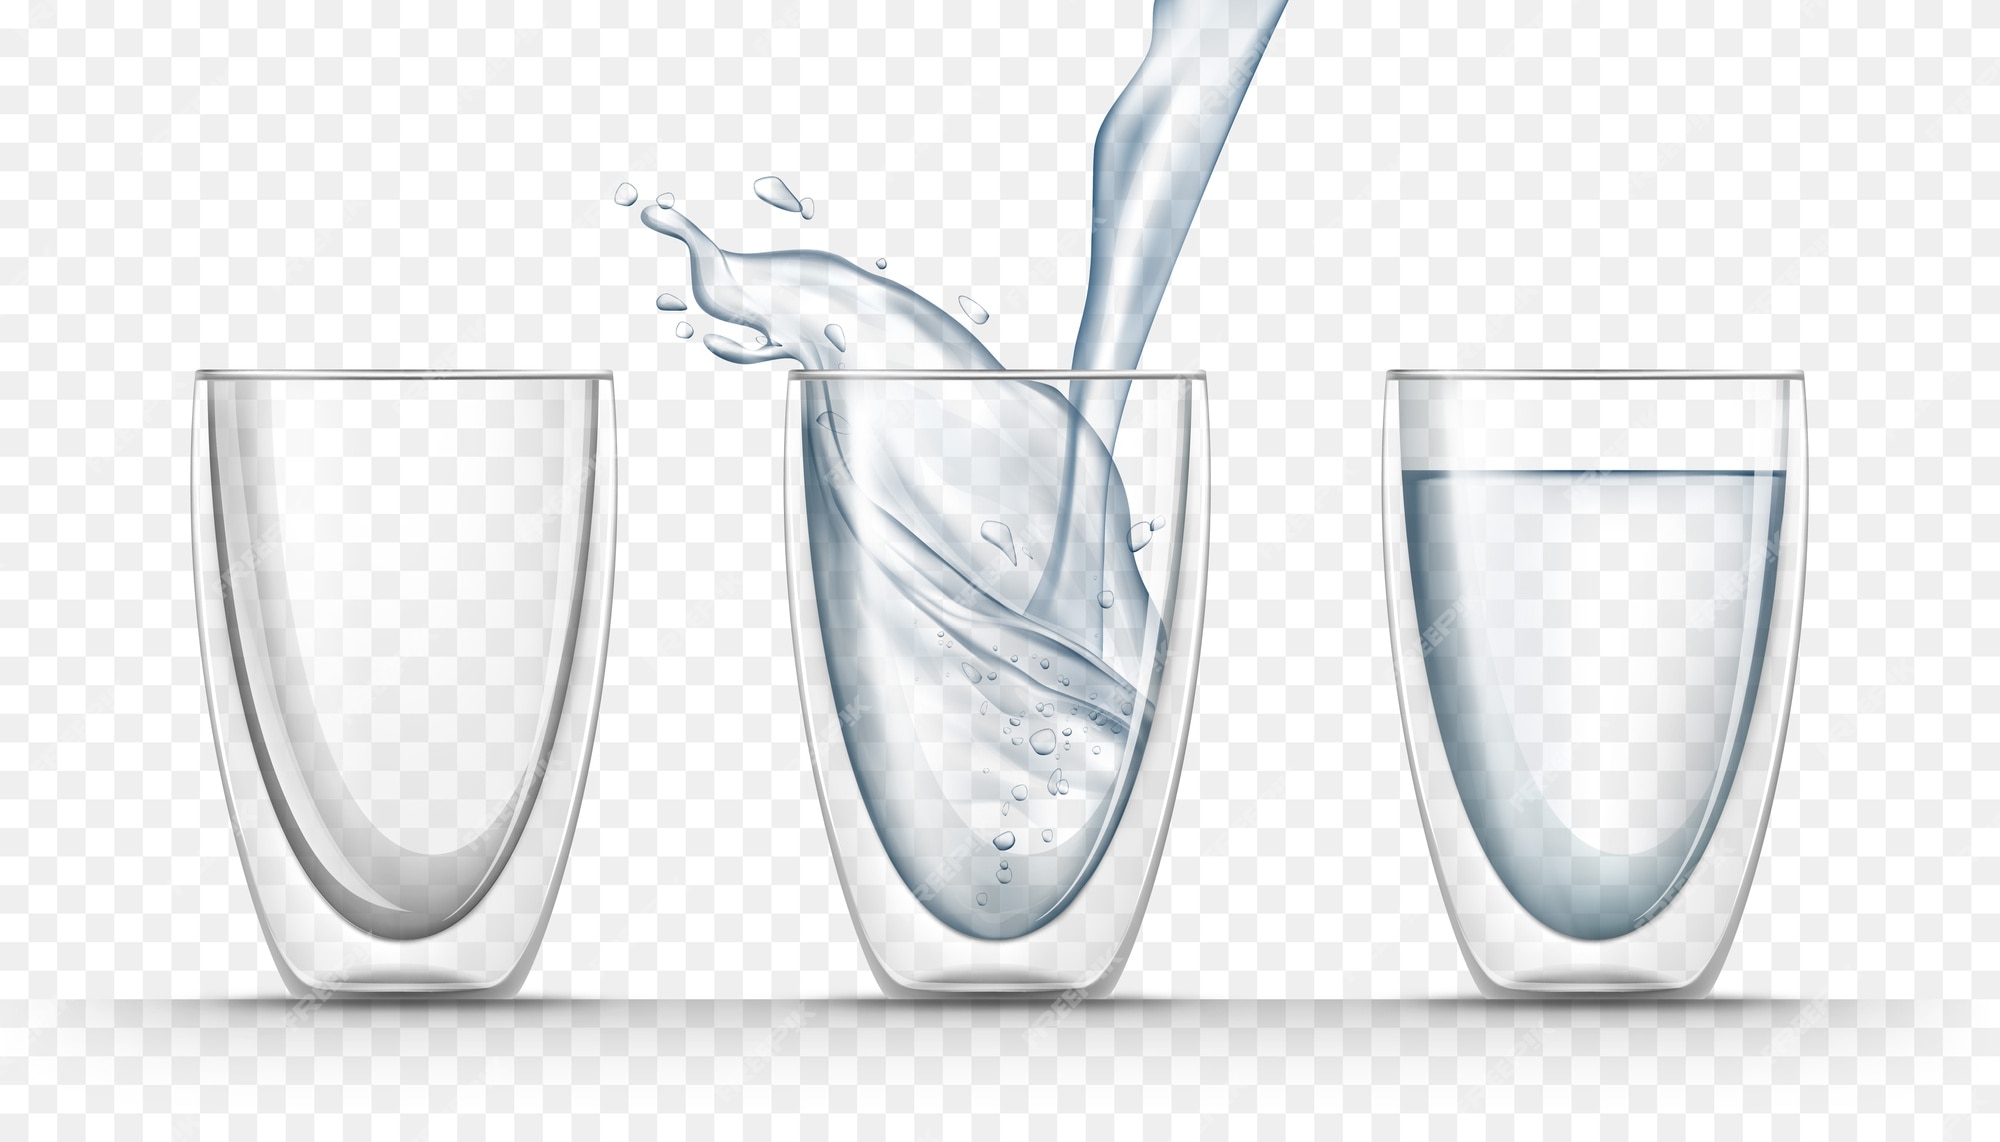 https://img.freepik.com/free-vector/transparent-glass-cups-with-fresh-water-realistic-style_88138-368.jpg?w=2000